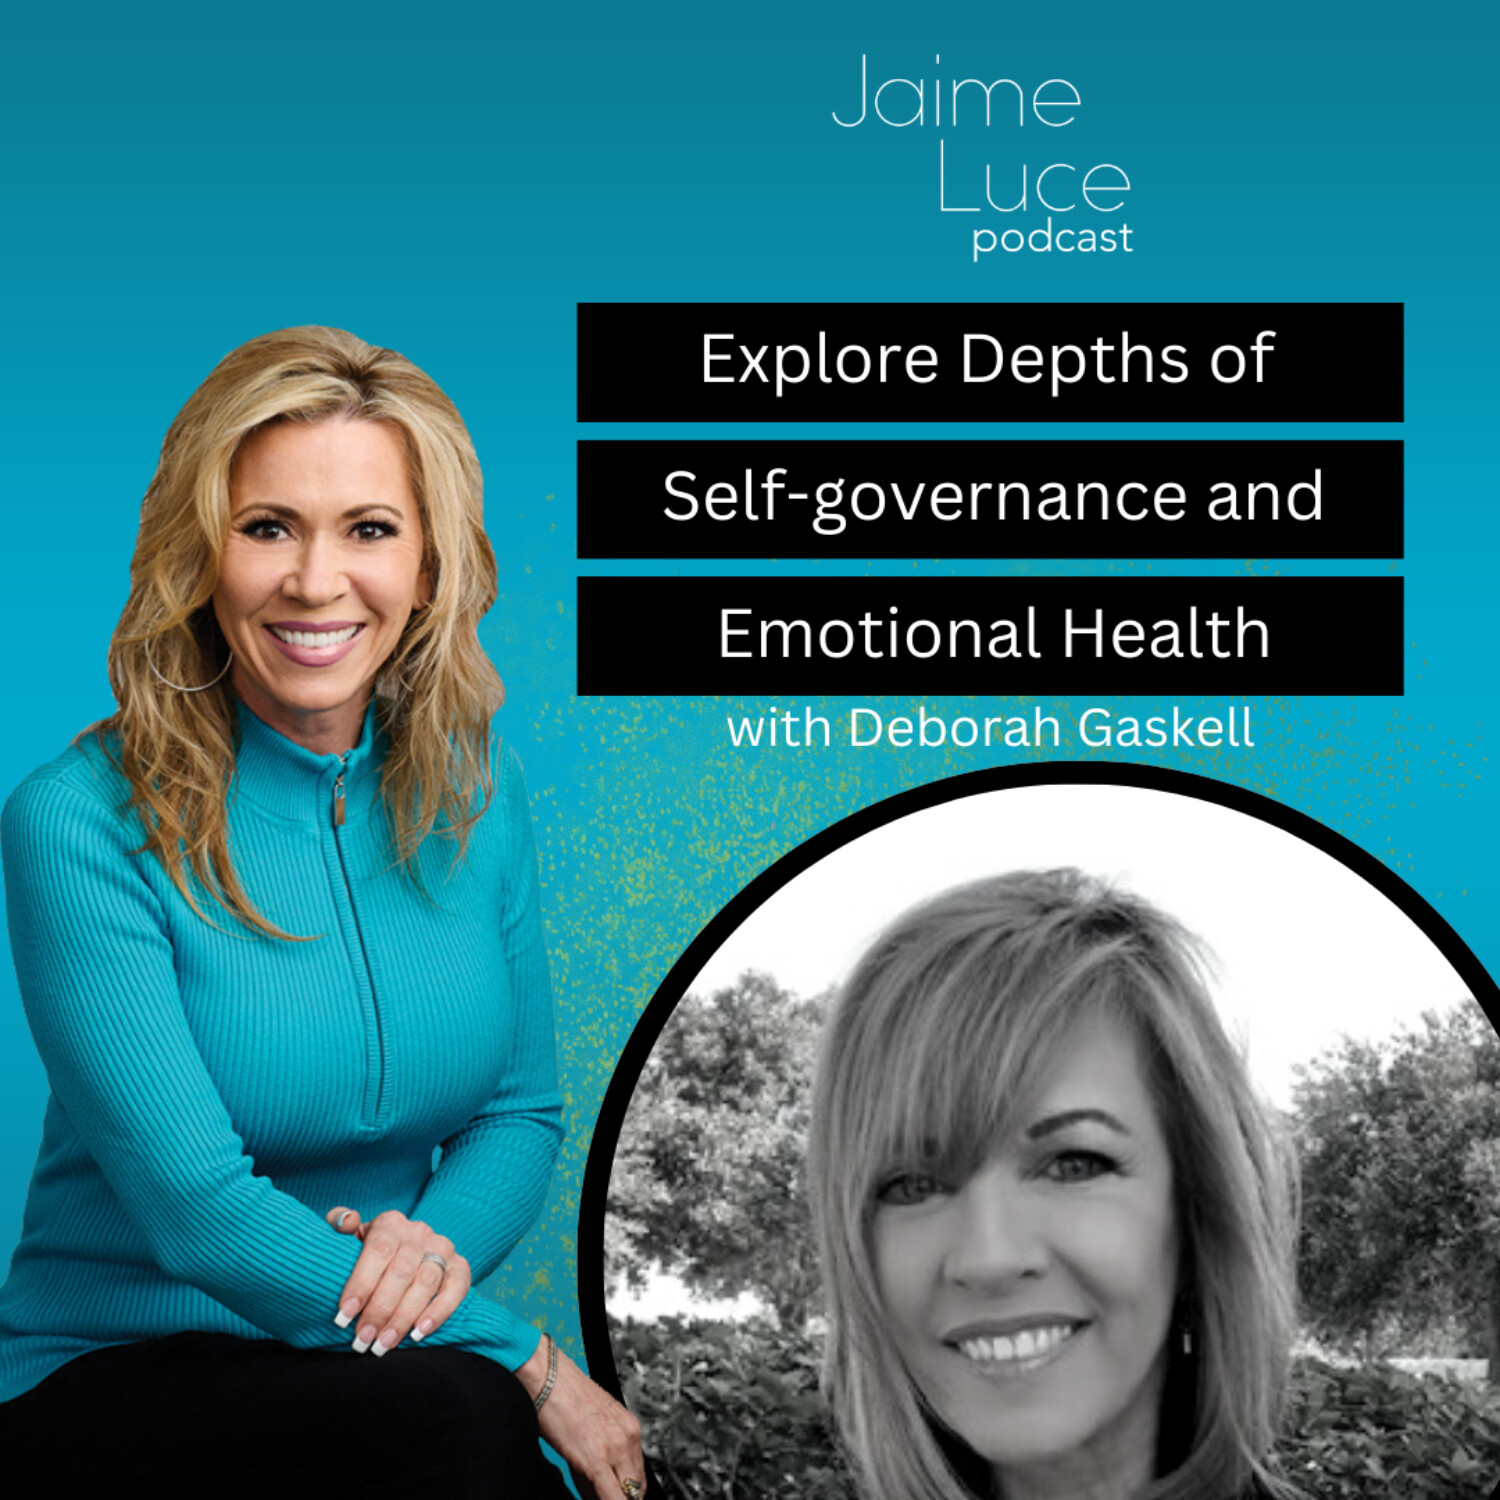 Explore Depths of  Self-governance and Emotional Health with Deborah Gaskell